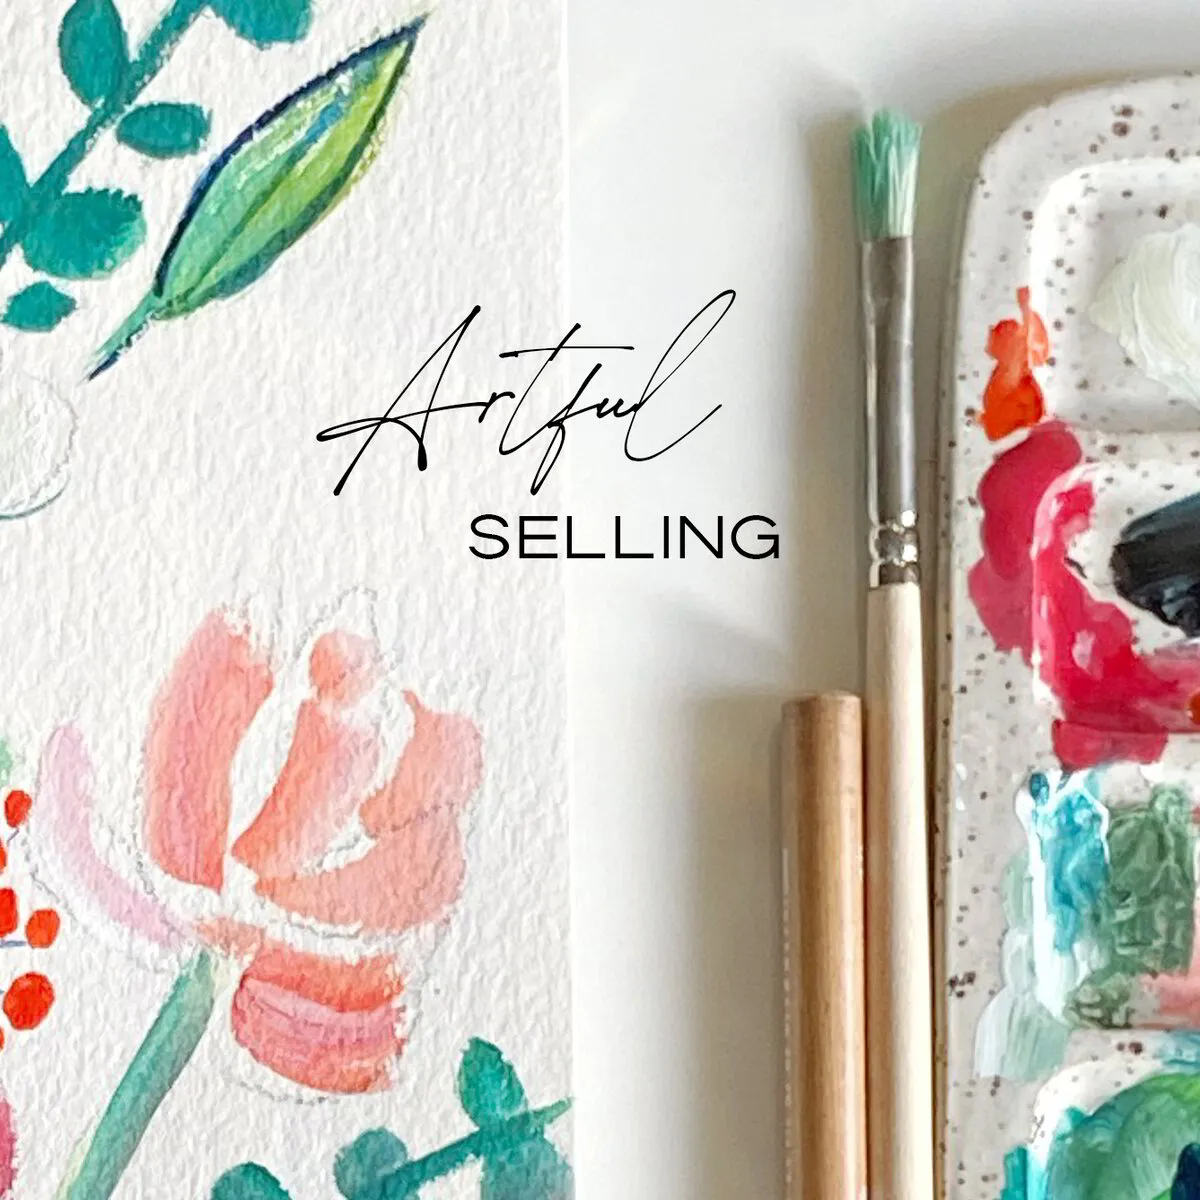 Artful Selling Course - 3 Pay Installment Plan